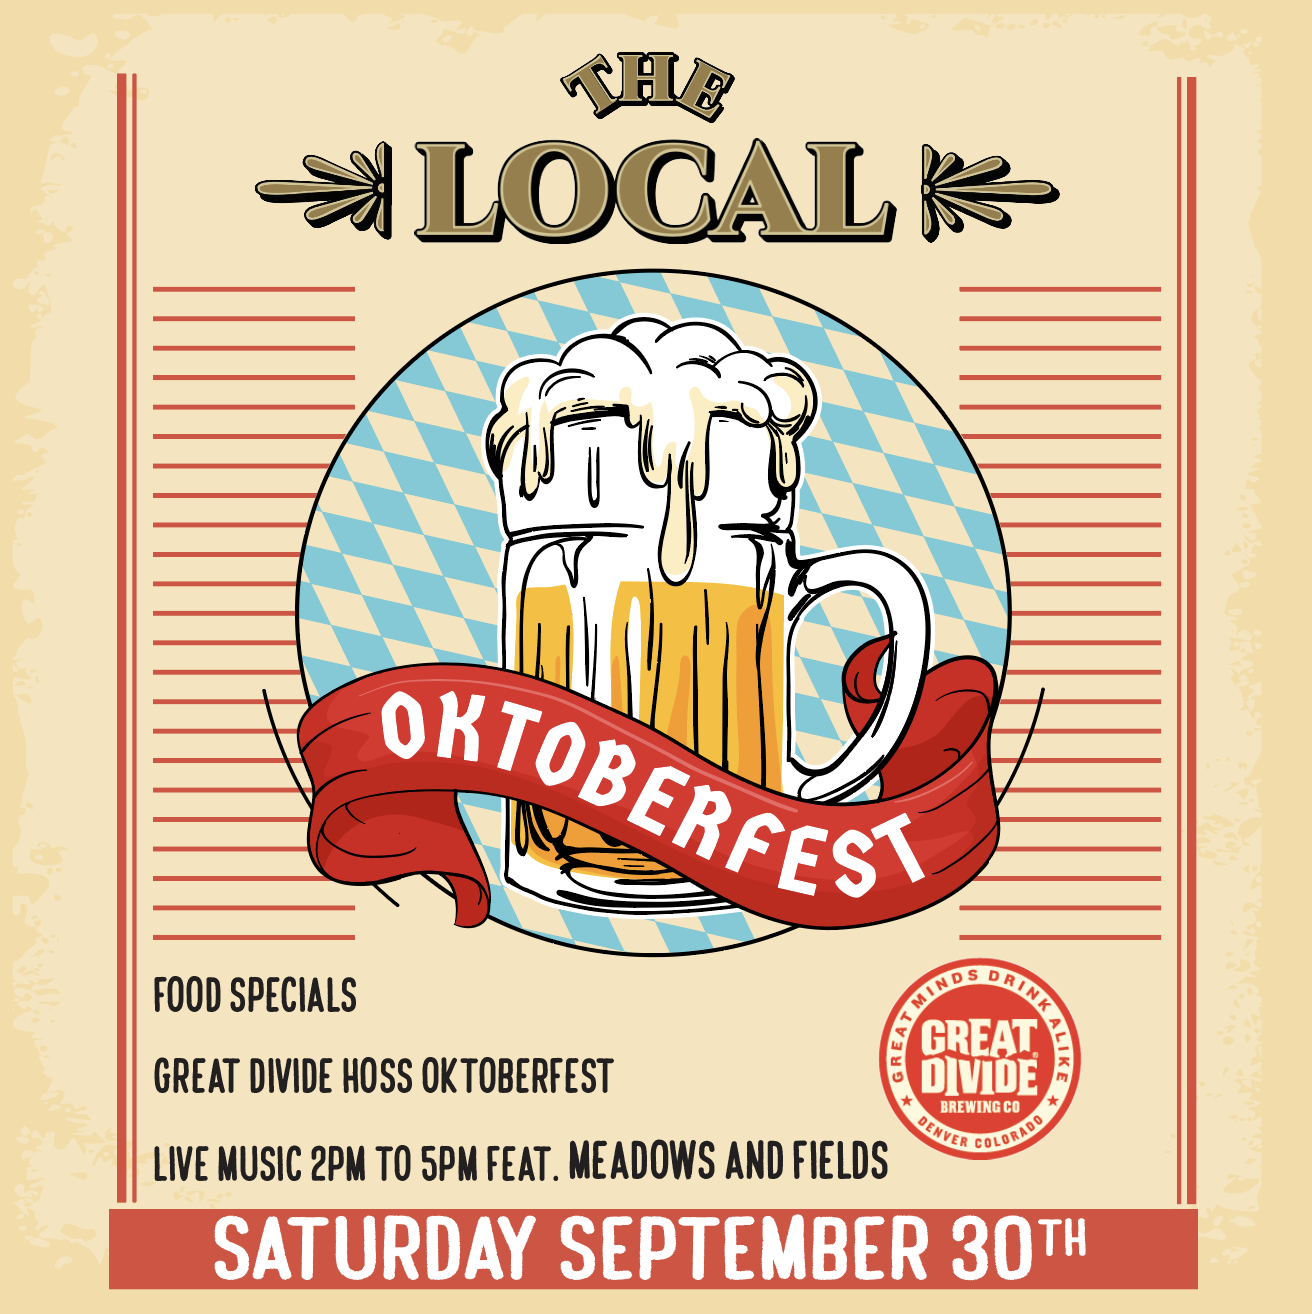 The Local. Oktoberfest. Food specials, Great Divide Hoss Oktoberfest, Live music 2pm to 5pm featuring Meadows & Fields. Saturday September 30th.